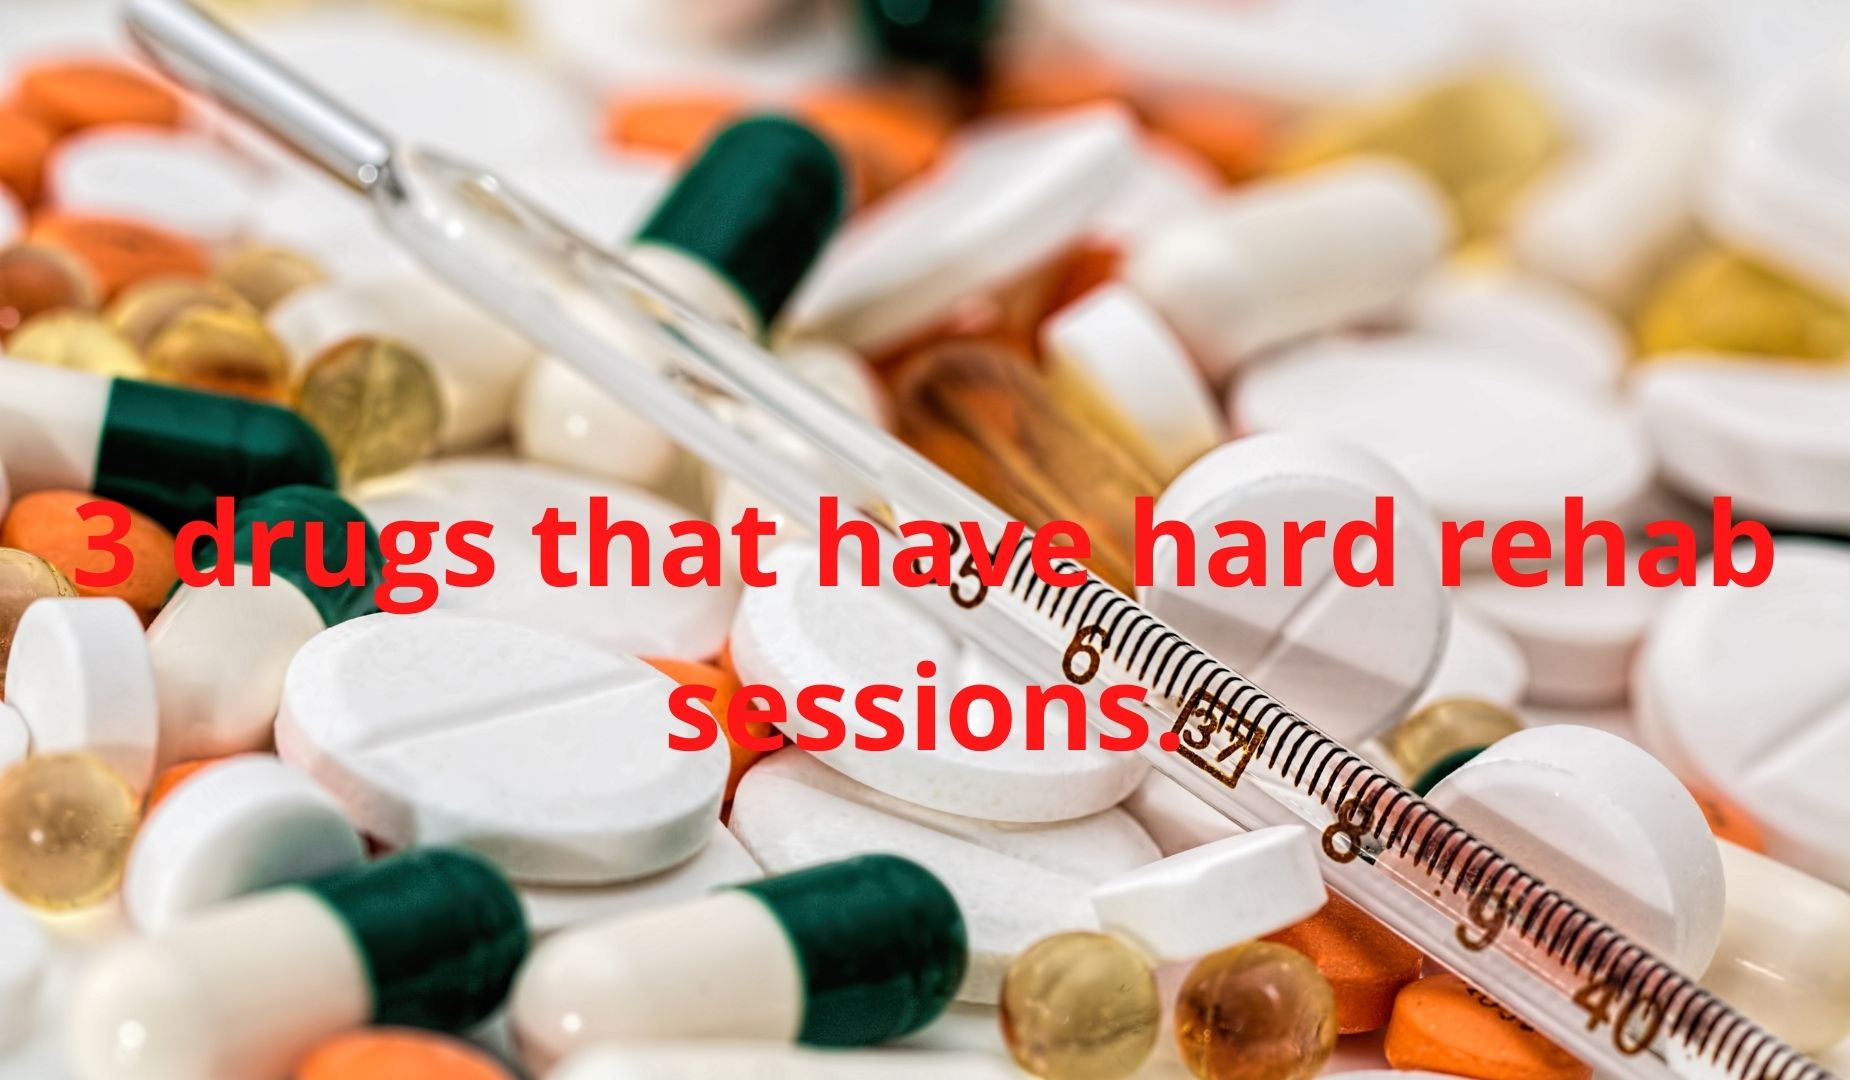 3 drugs that have hard rehab sessions.